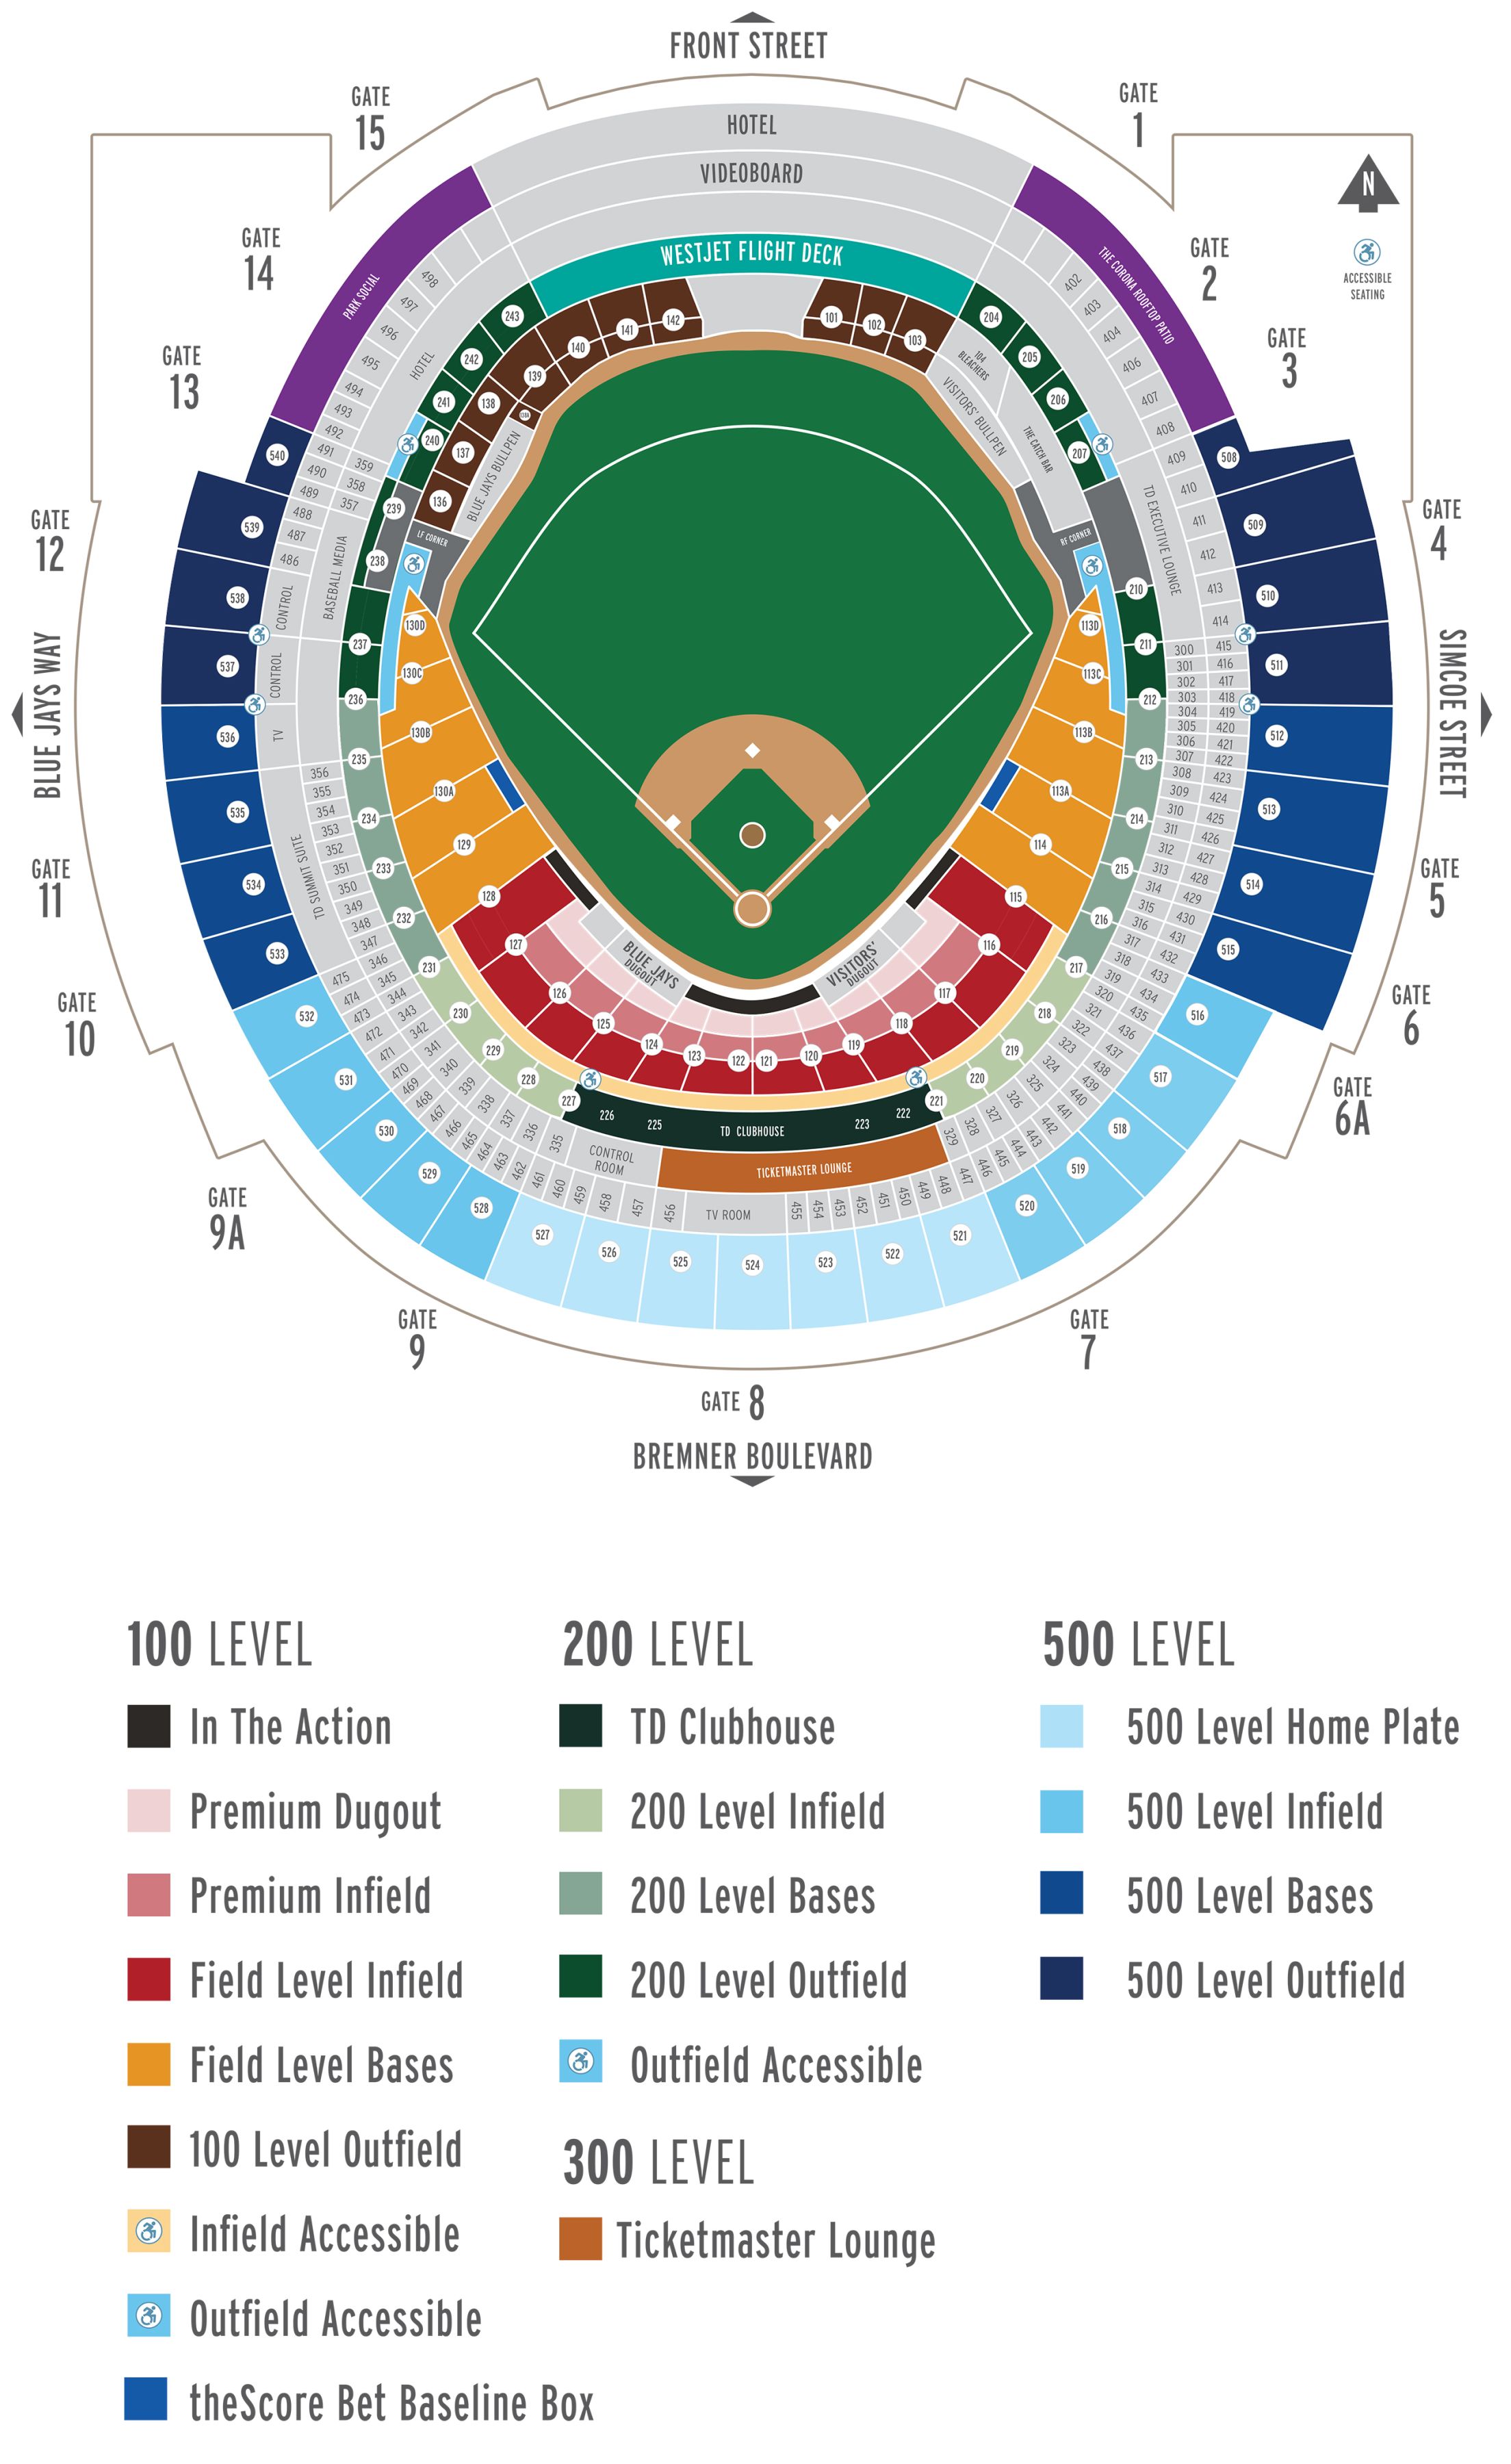 Breakdown Of The Rogers Centre Seating Chart